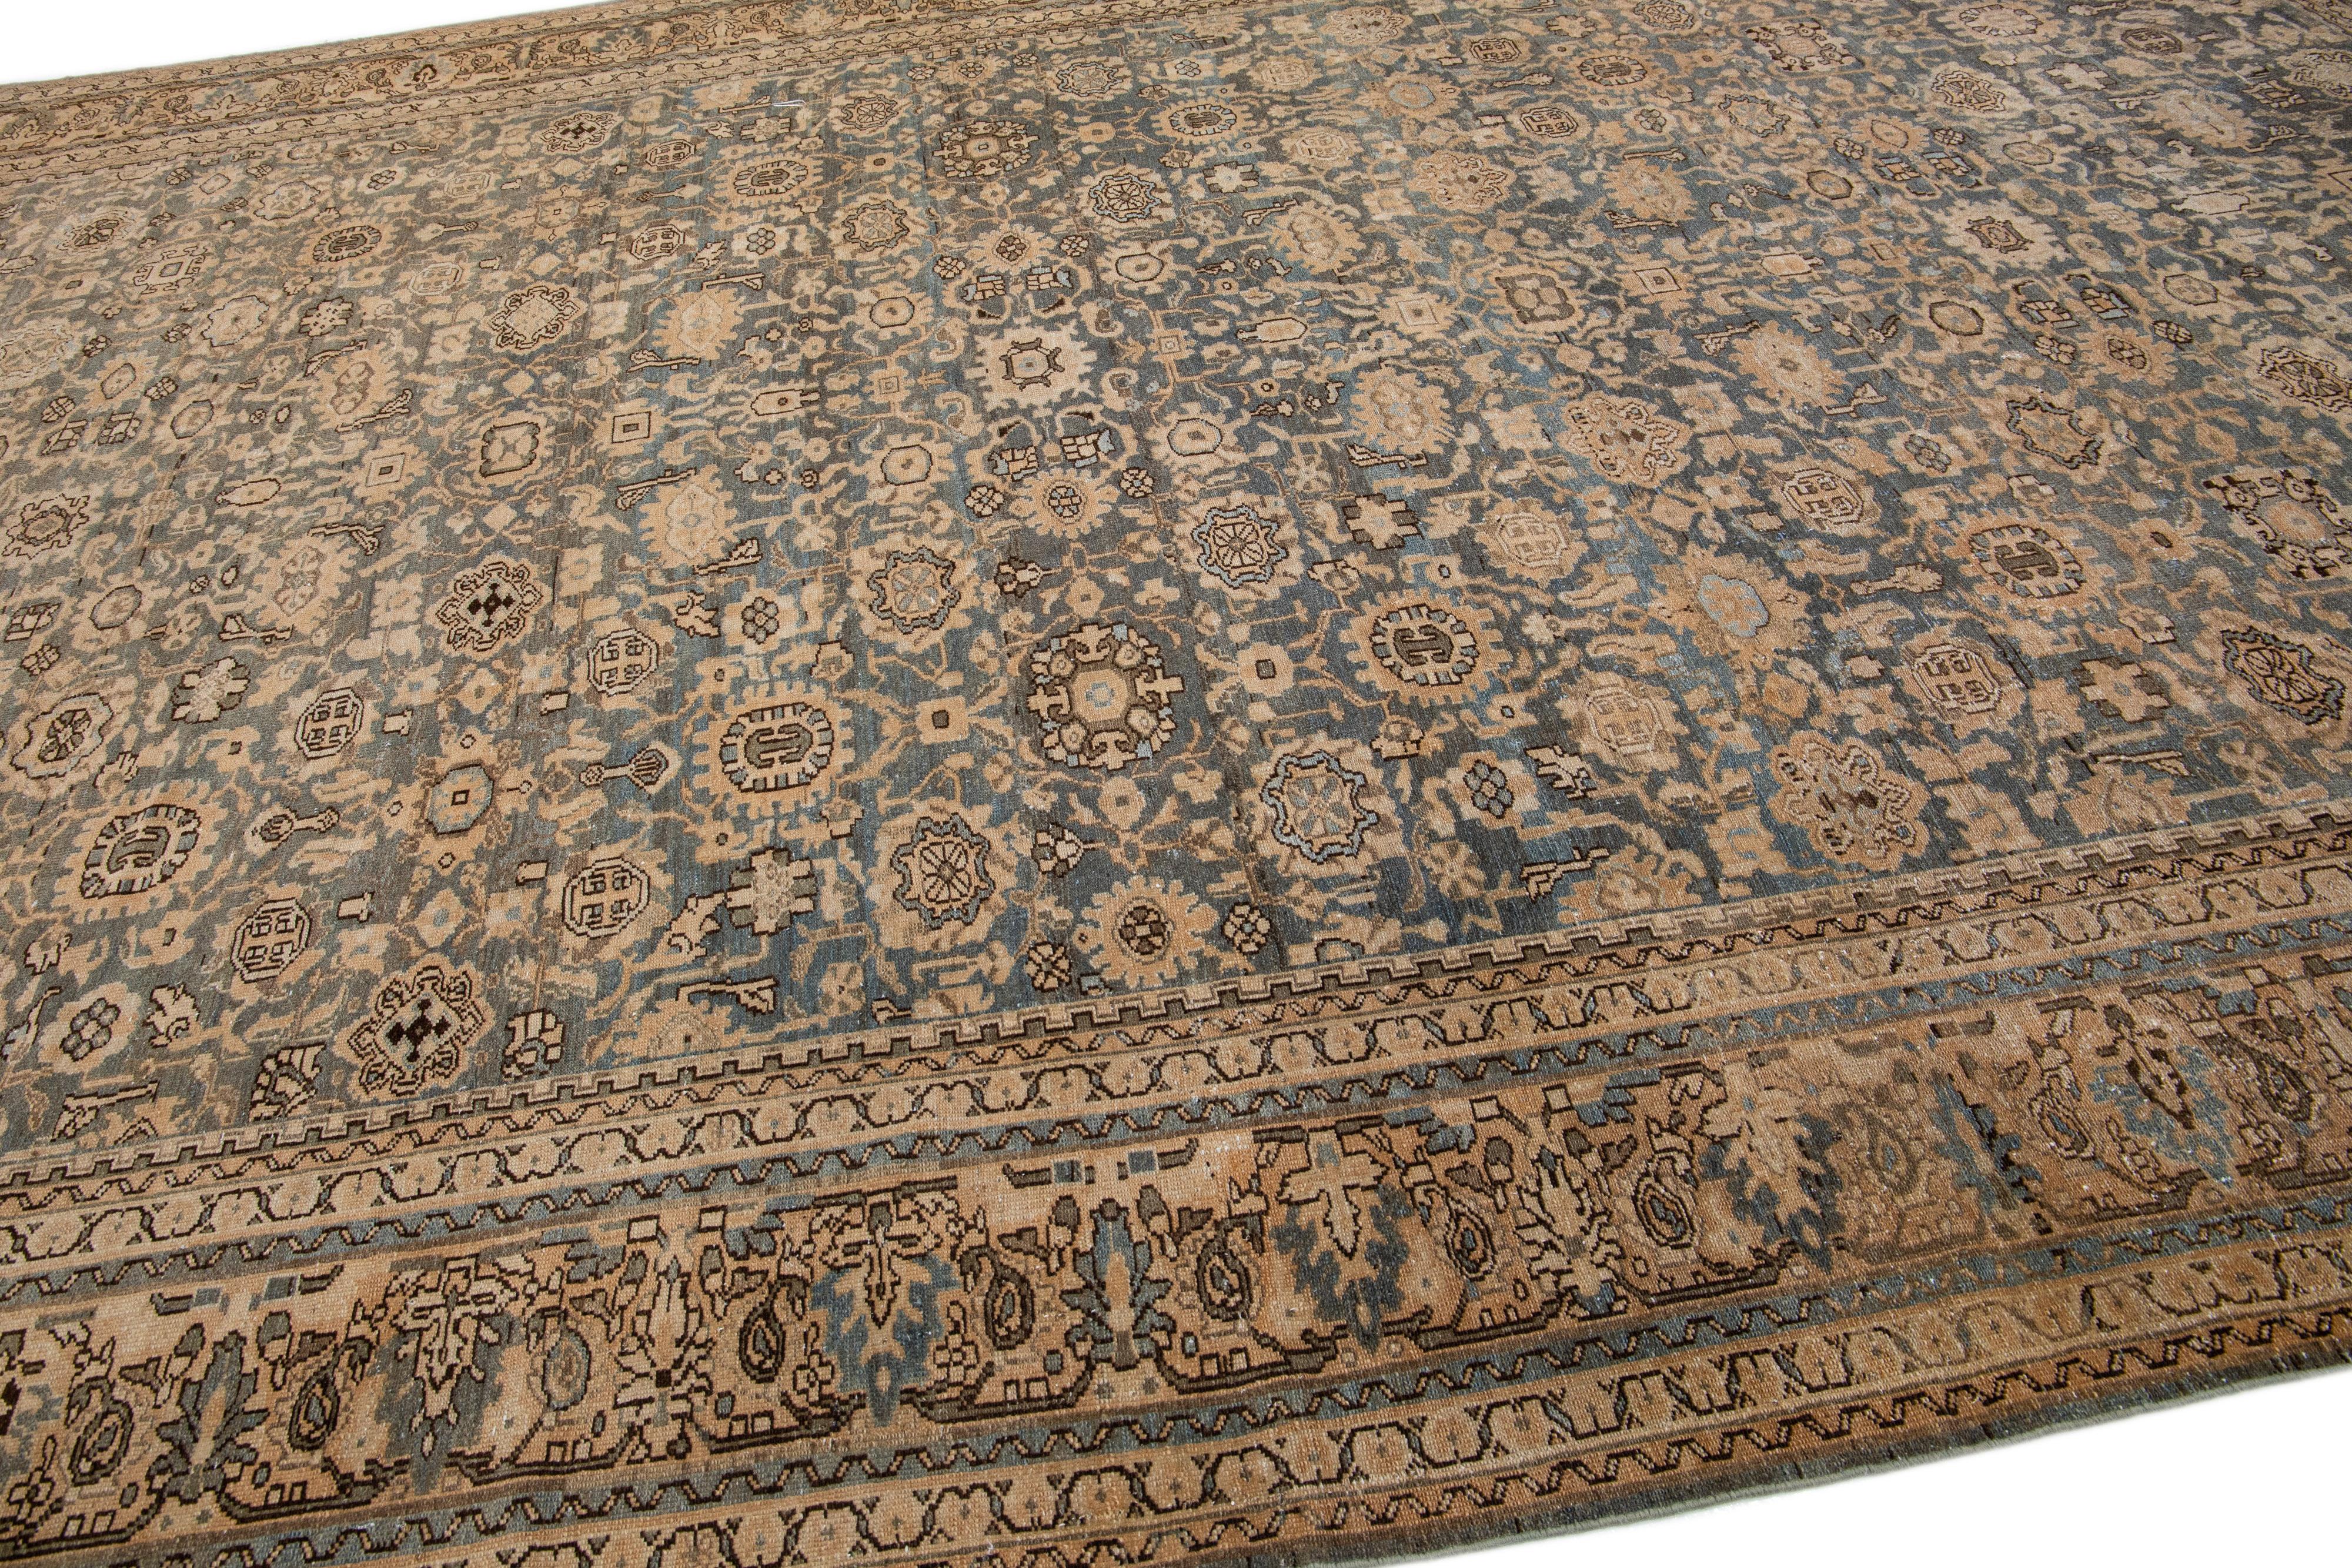 1900s Handmade Persian Malayer Allover Wool Rug with Muted Tones In Good Condition For Sale In Norwalk, CT